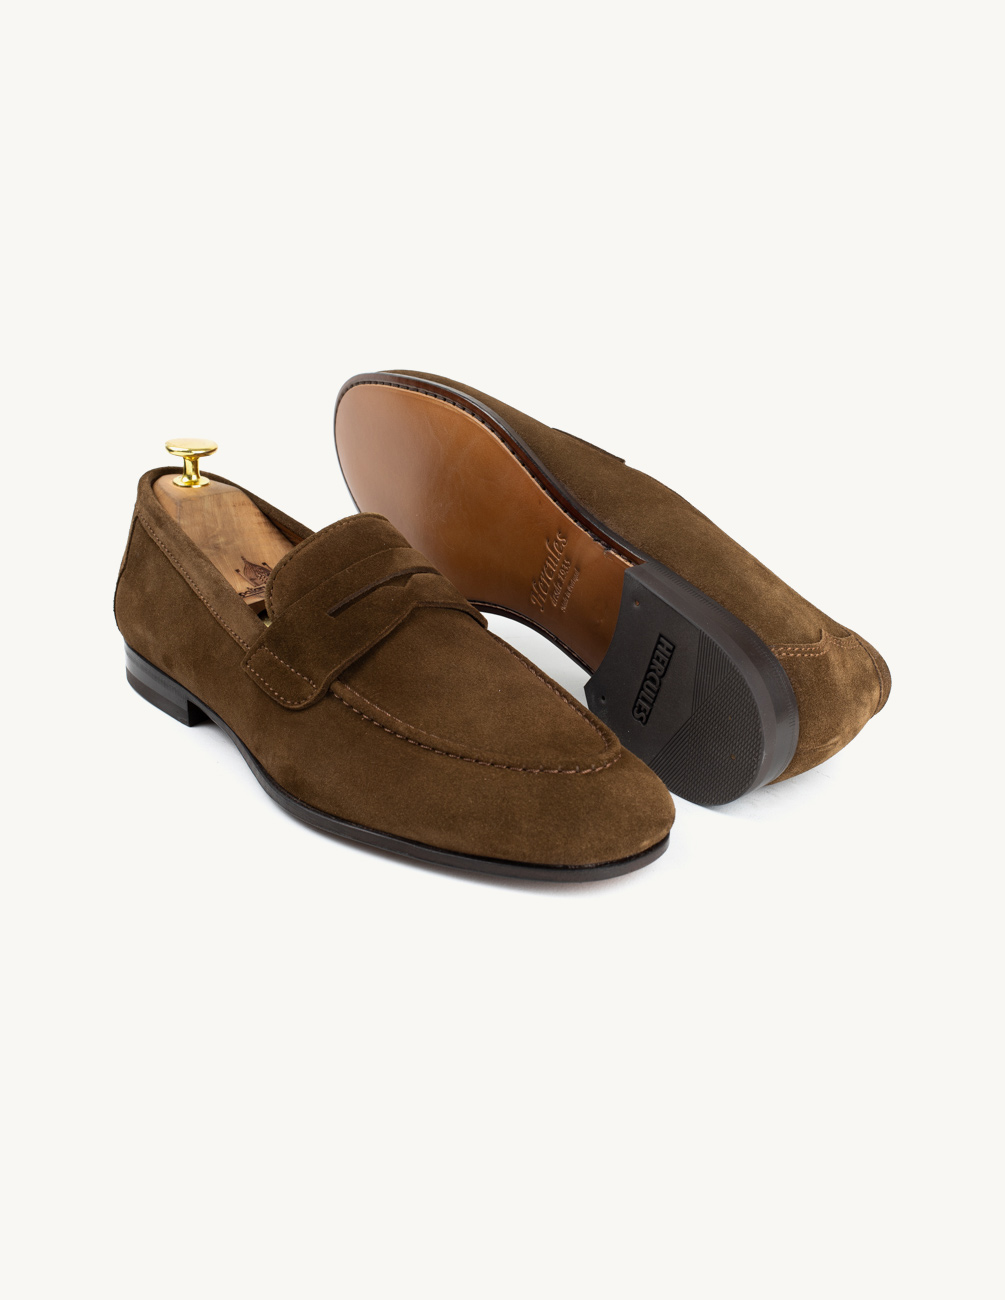 penny loafer brown suede